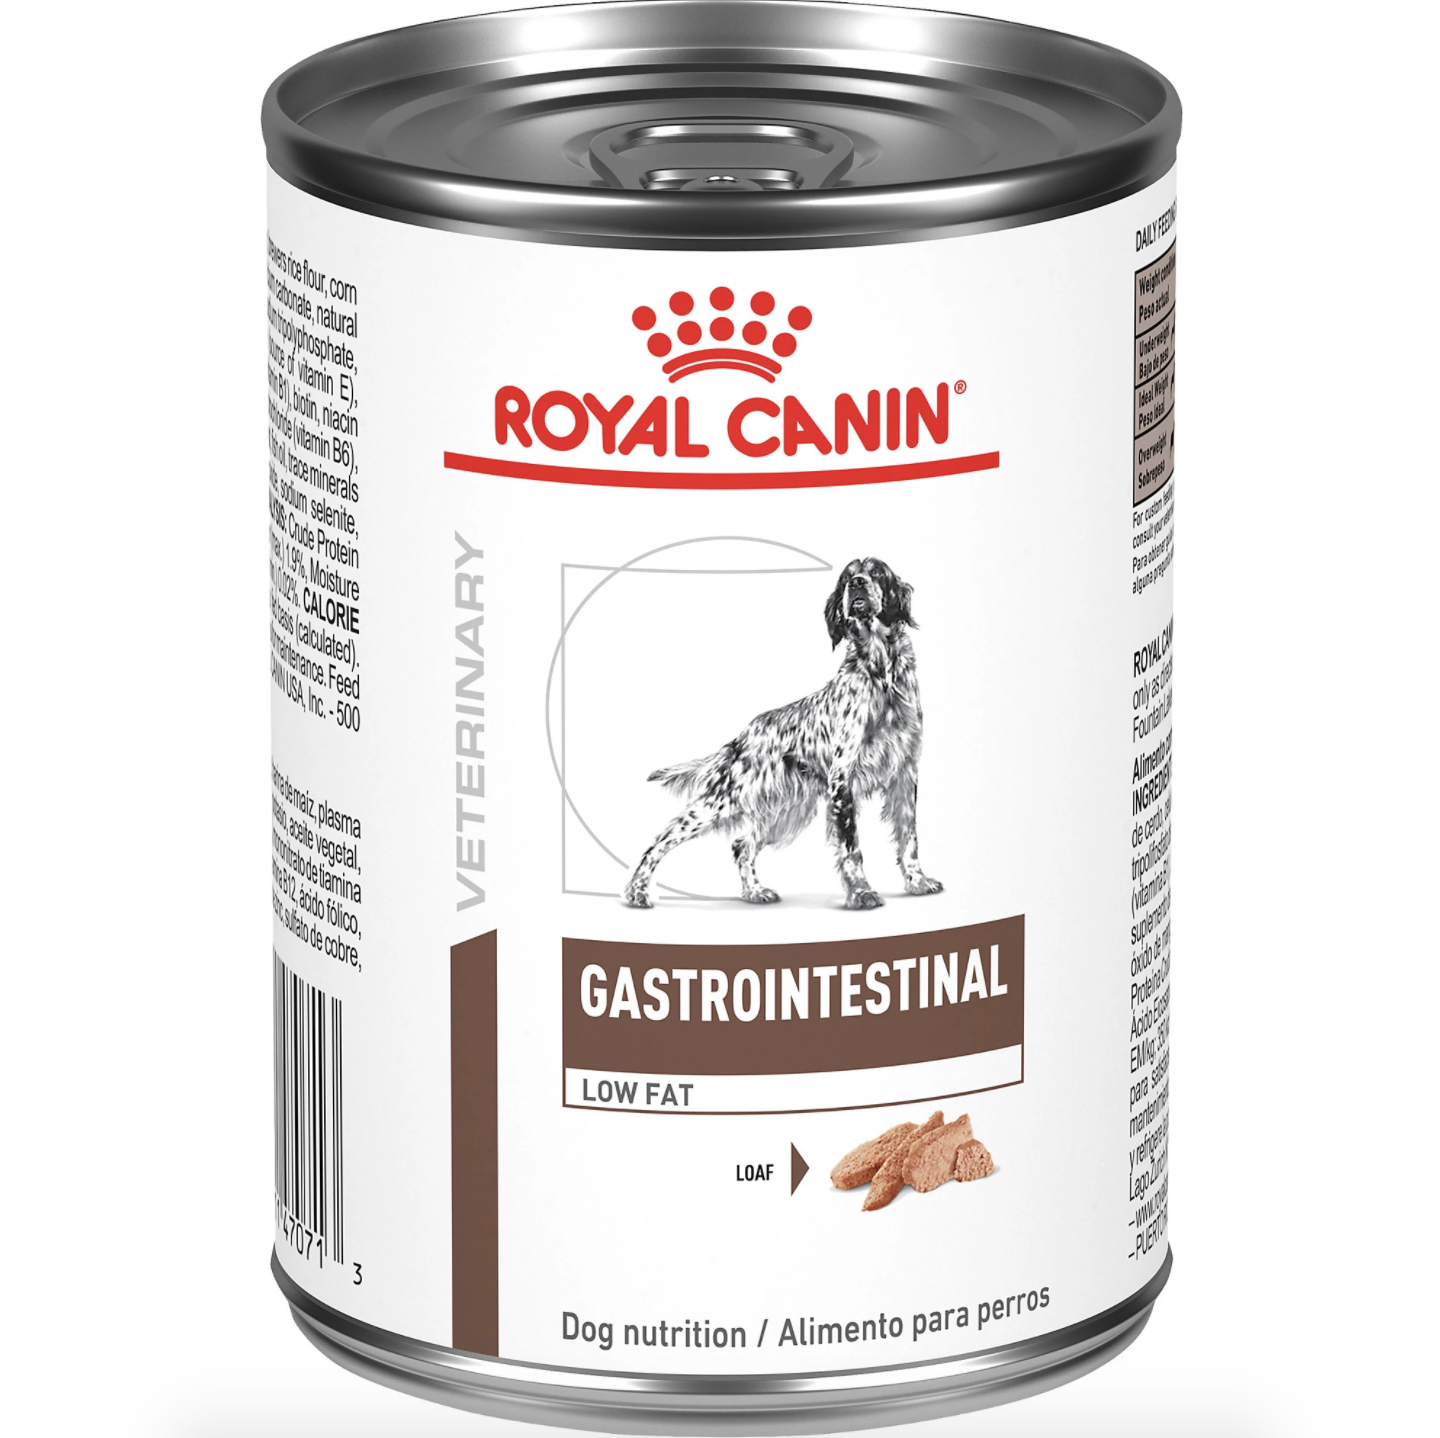 Royal Canin Veterinary Diet Gastrointestinal low fat loaf wet dog food